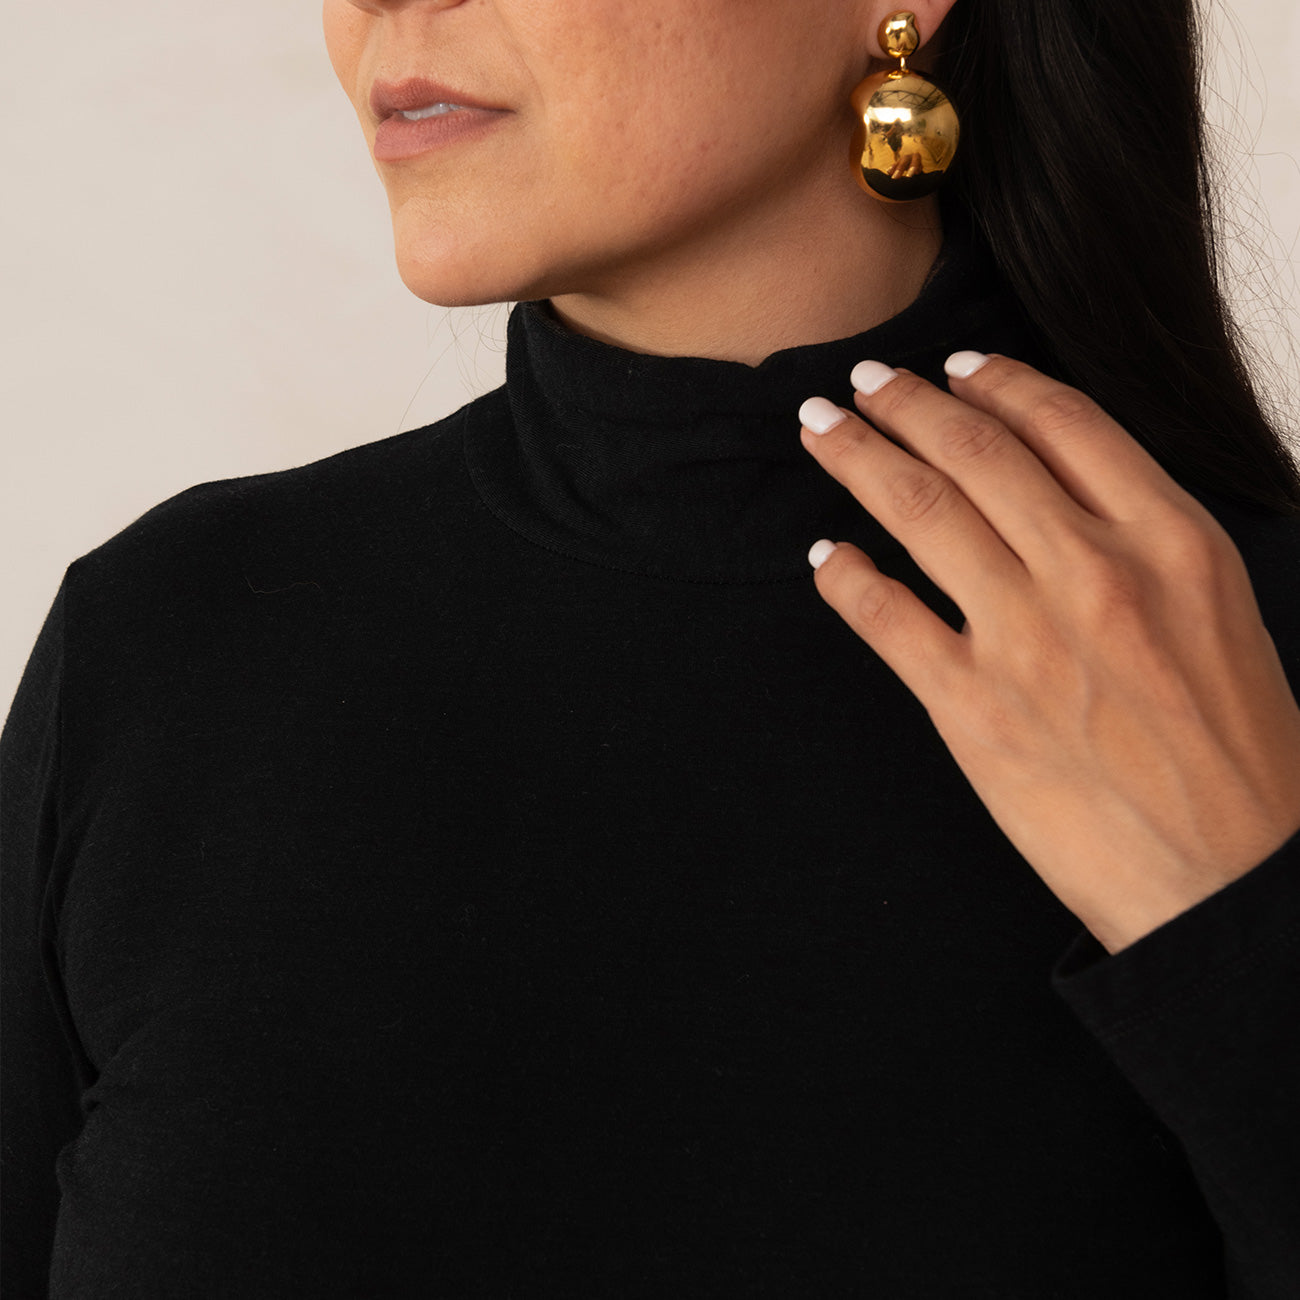 close up image of woman wearing a black turtleneck top